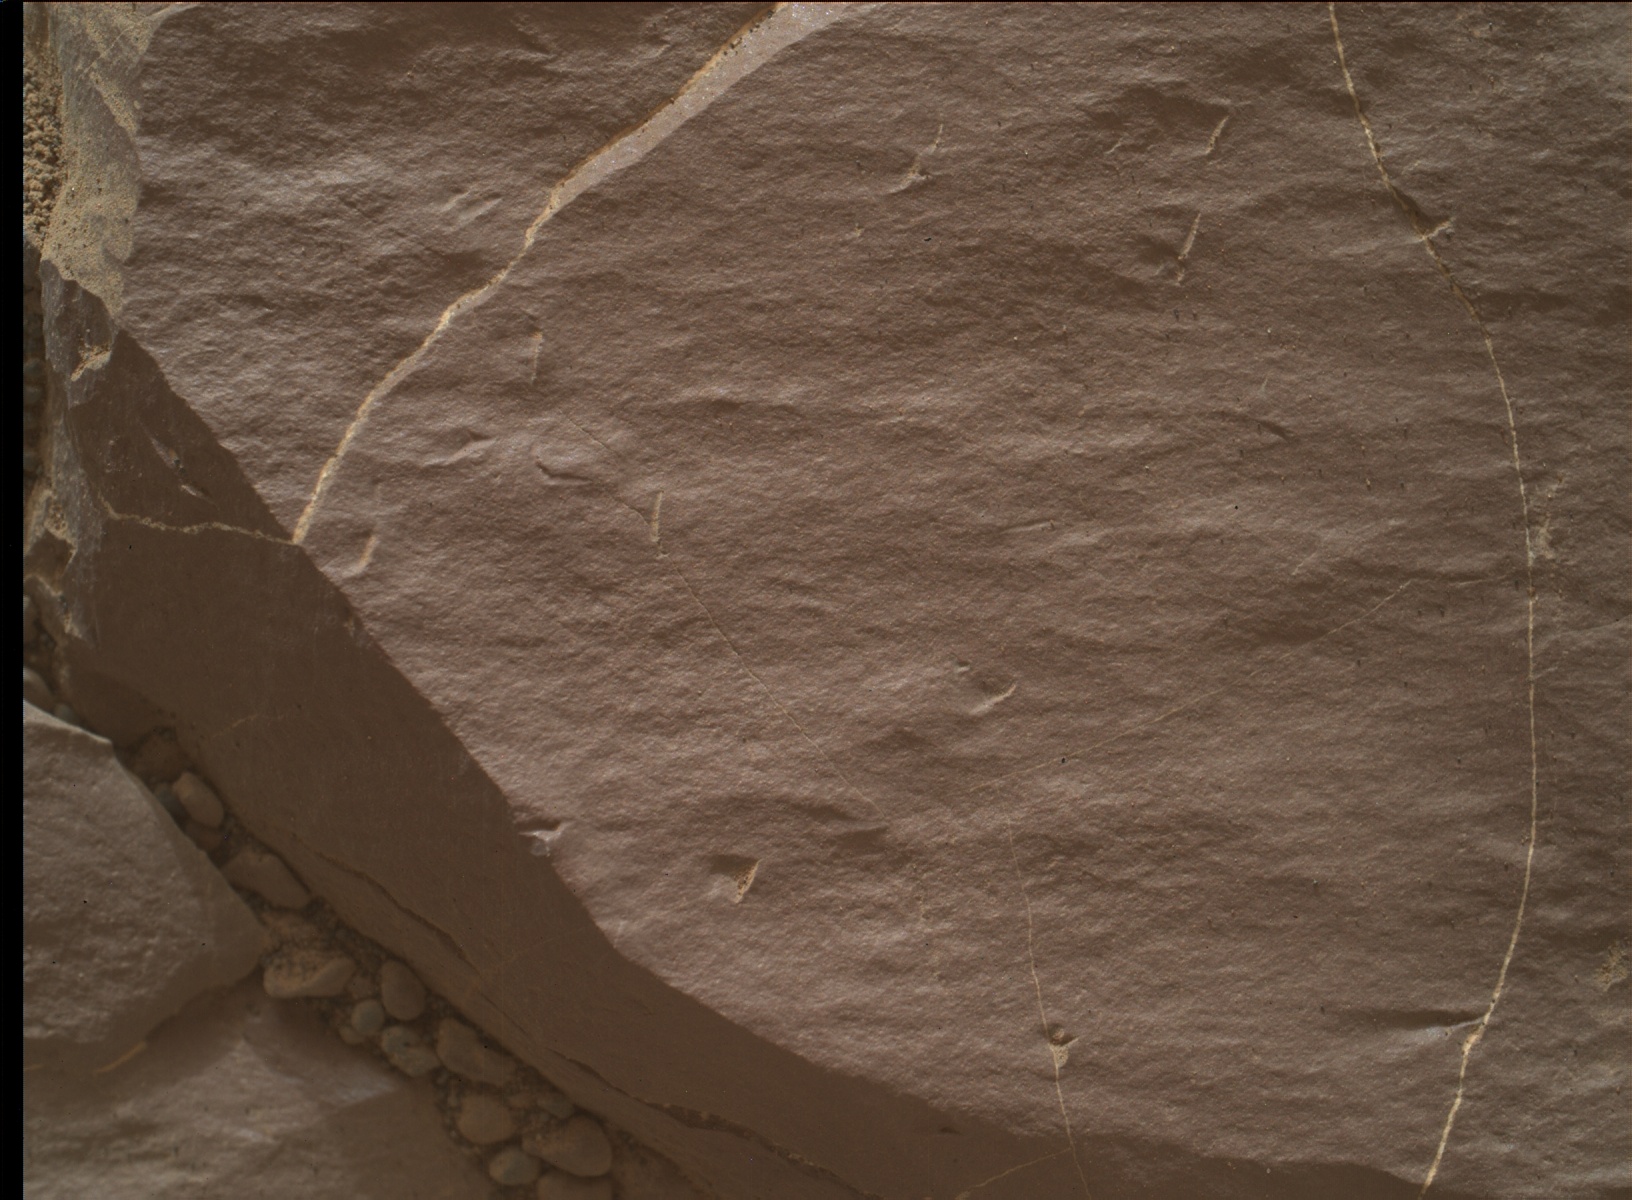 Nasa's Mars rover Curiosity acquired this image using its Mars Hand Lens Imager (MAHLI) on Sol 2254